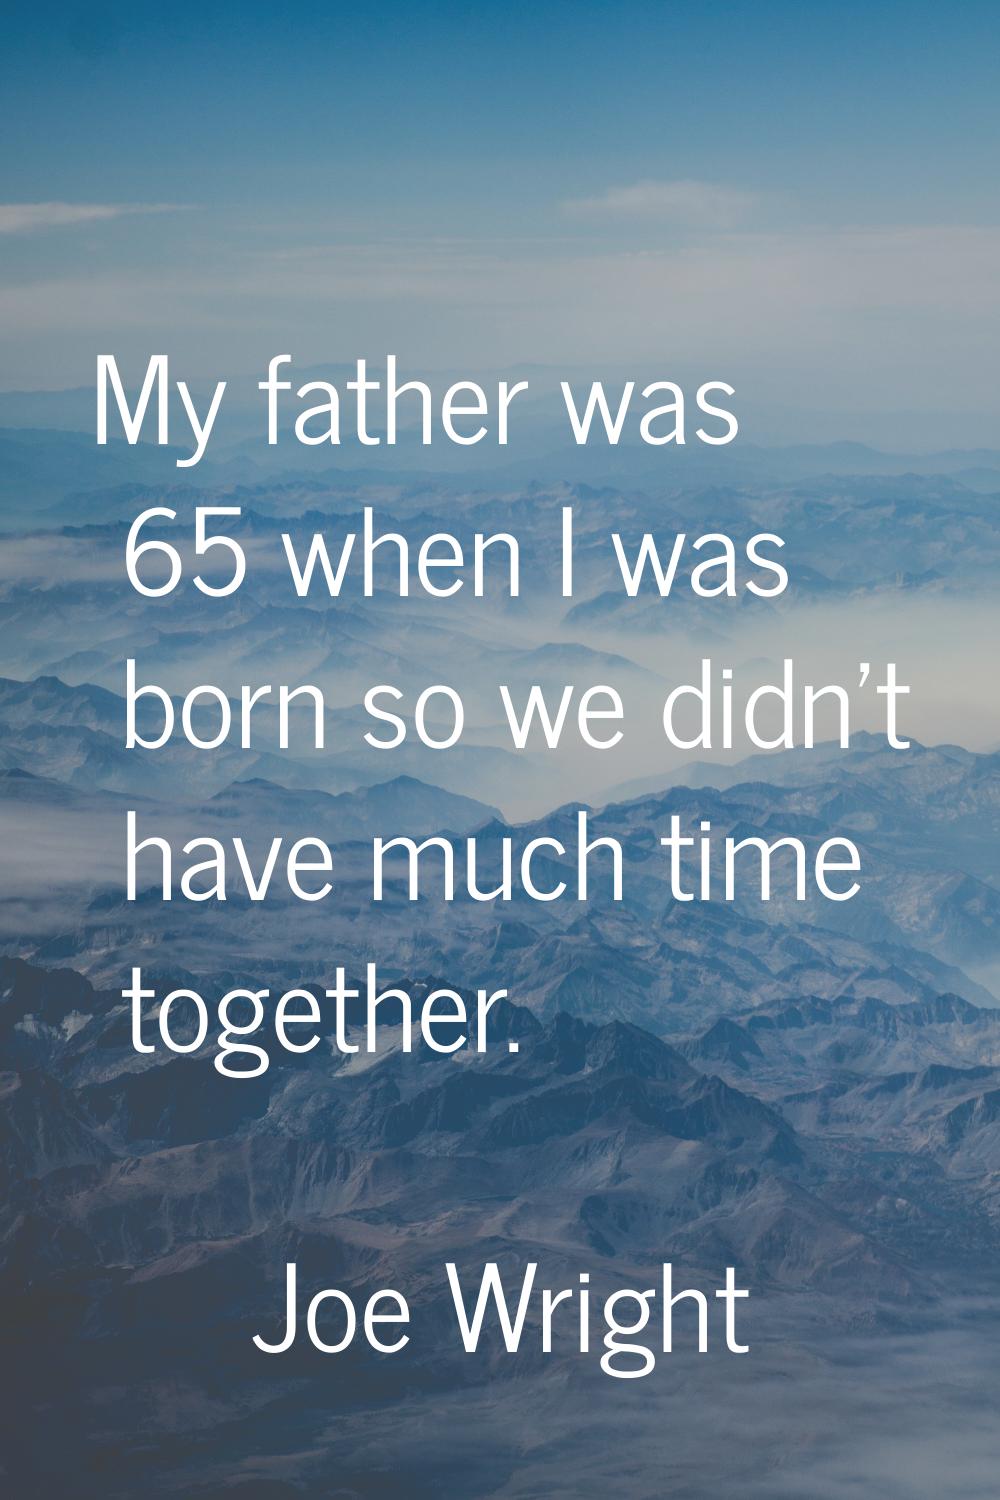 My father was 65 when I was born so we didn't have much time together.